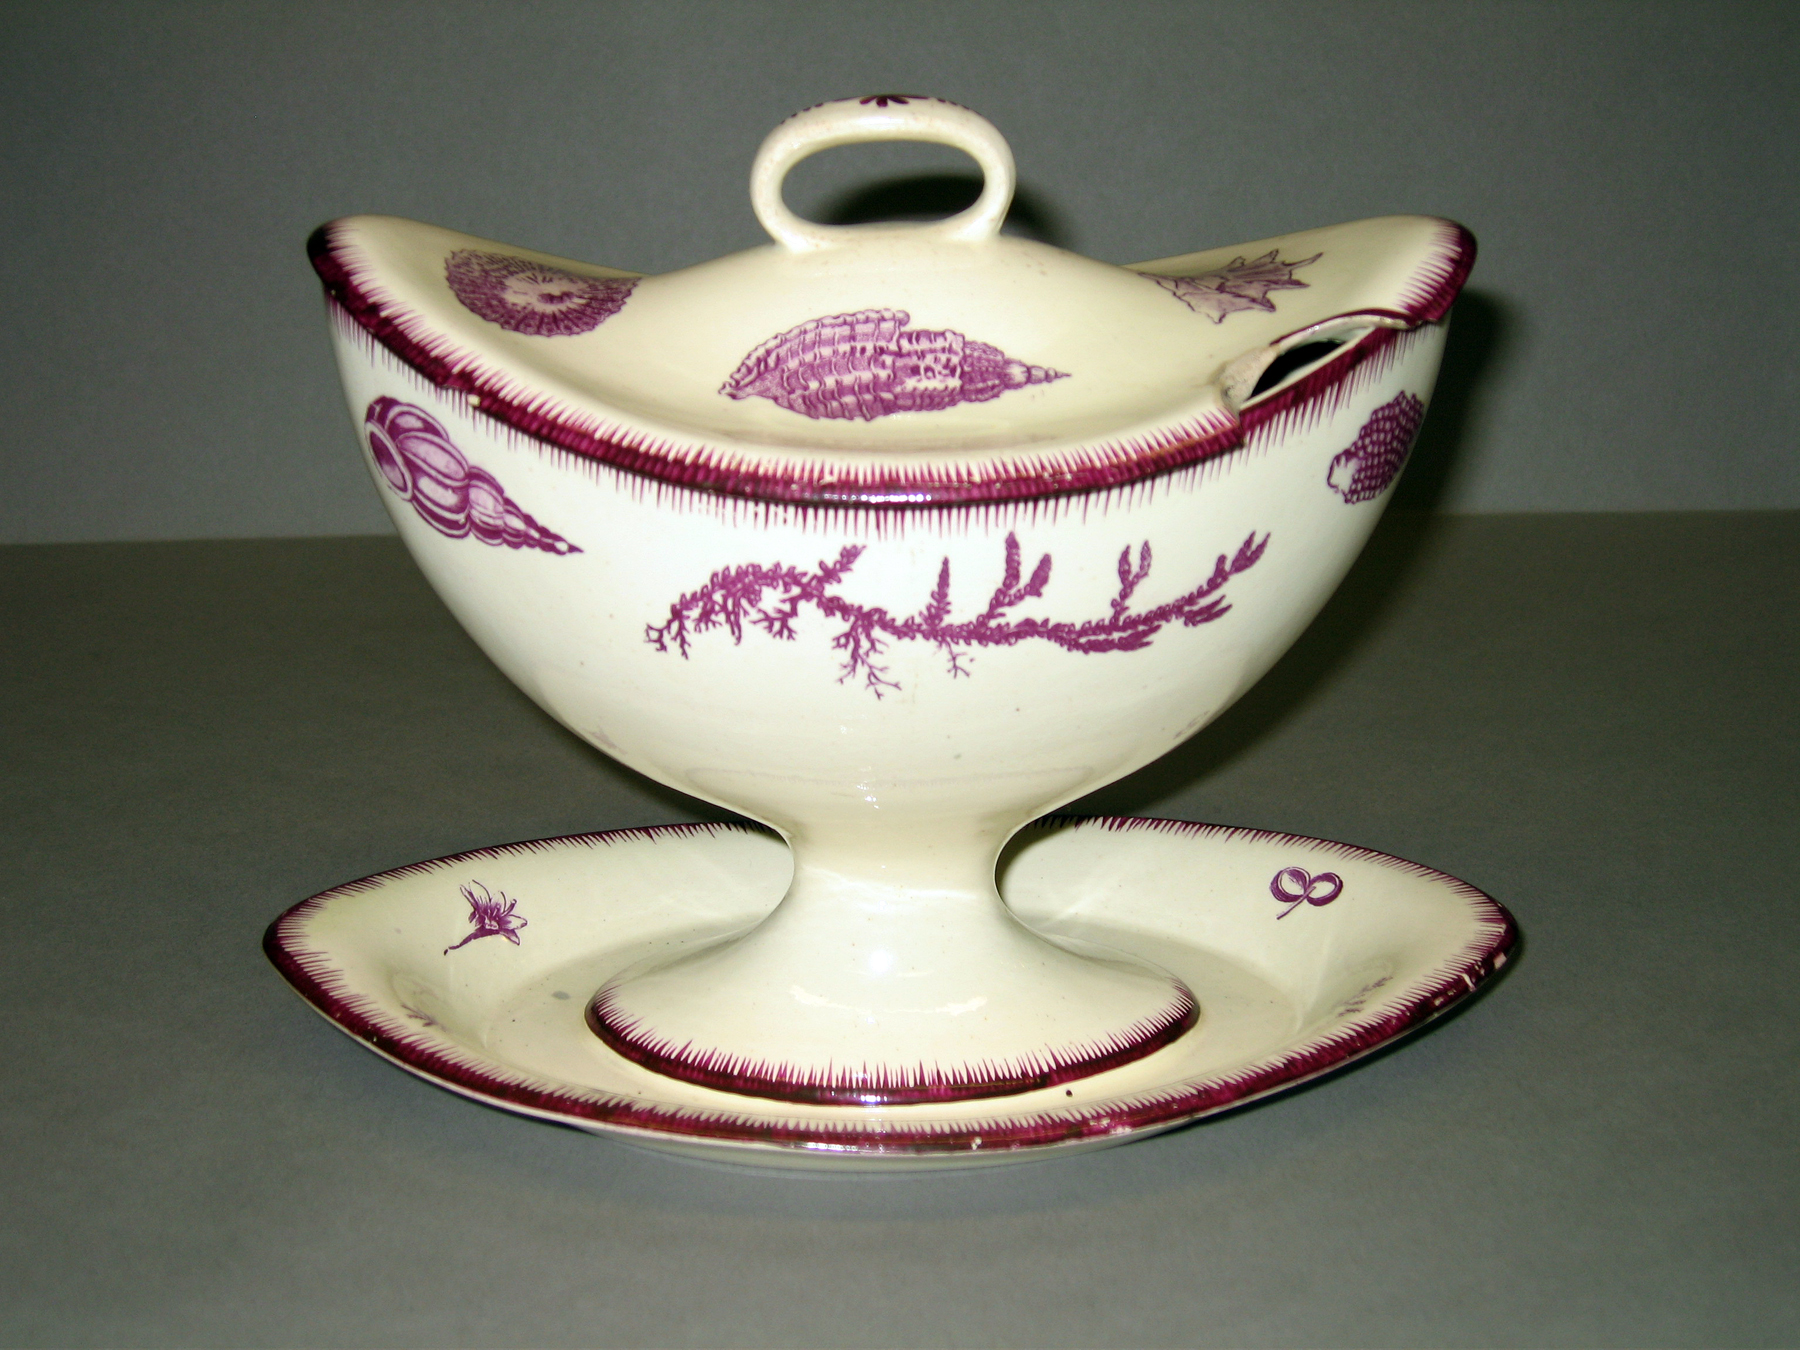 1964.0156.003 A, B Sauce boat and cover